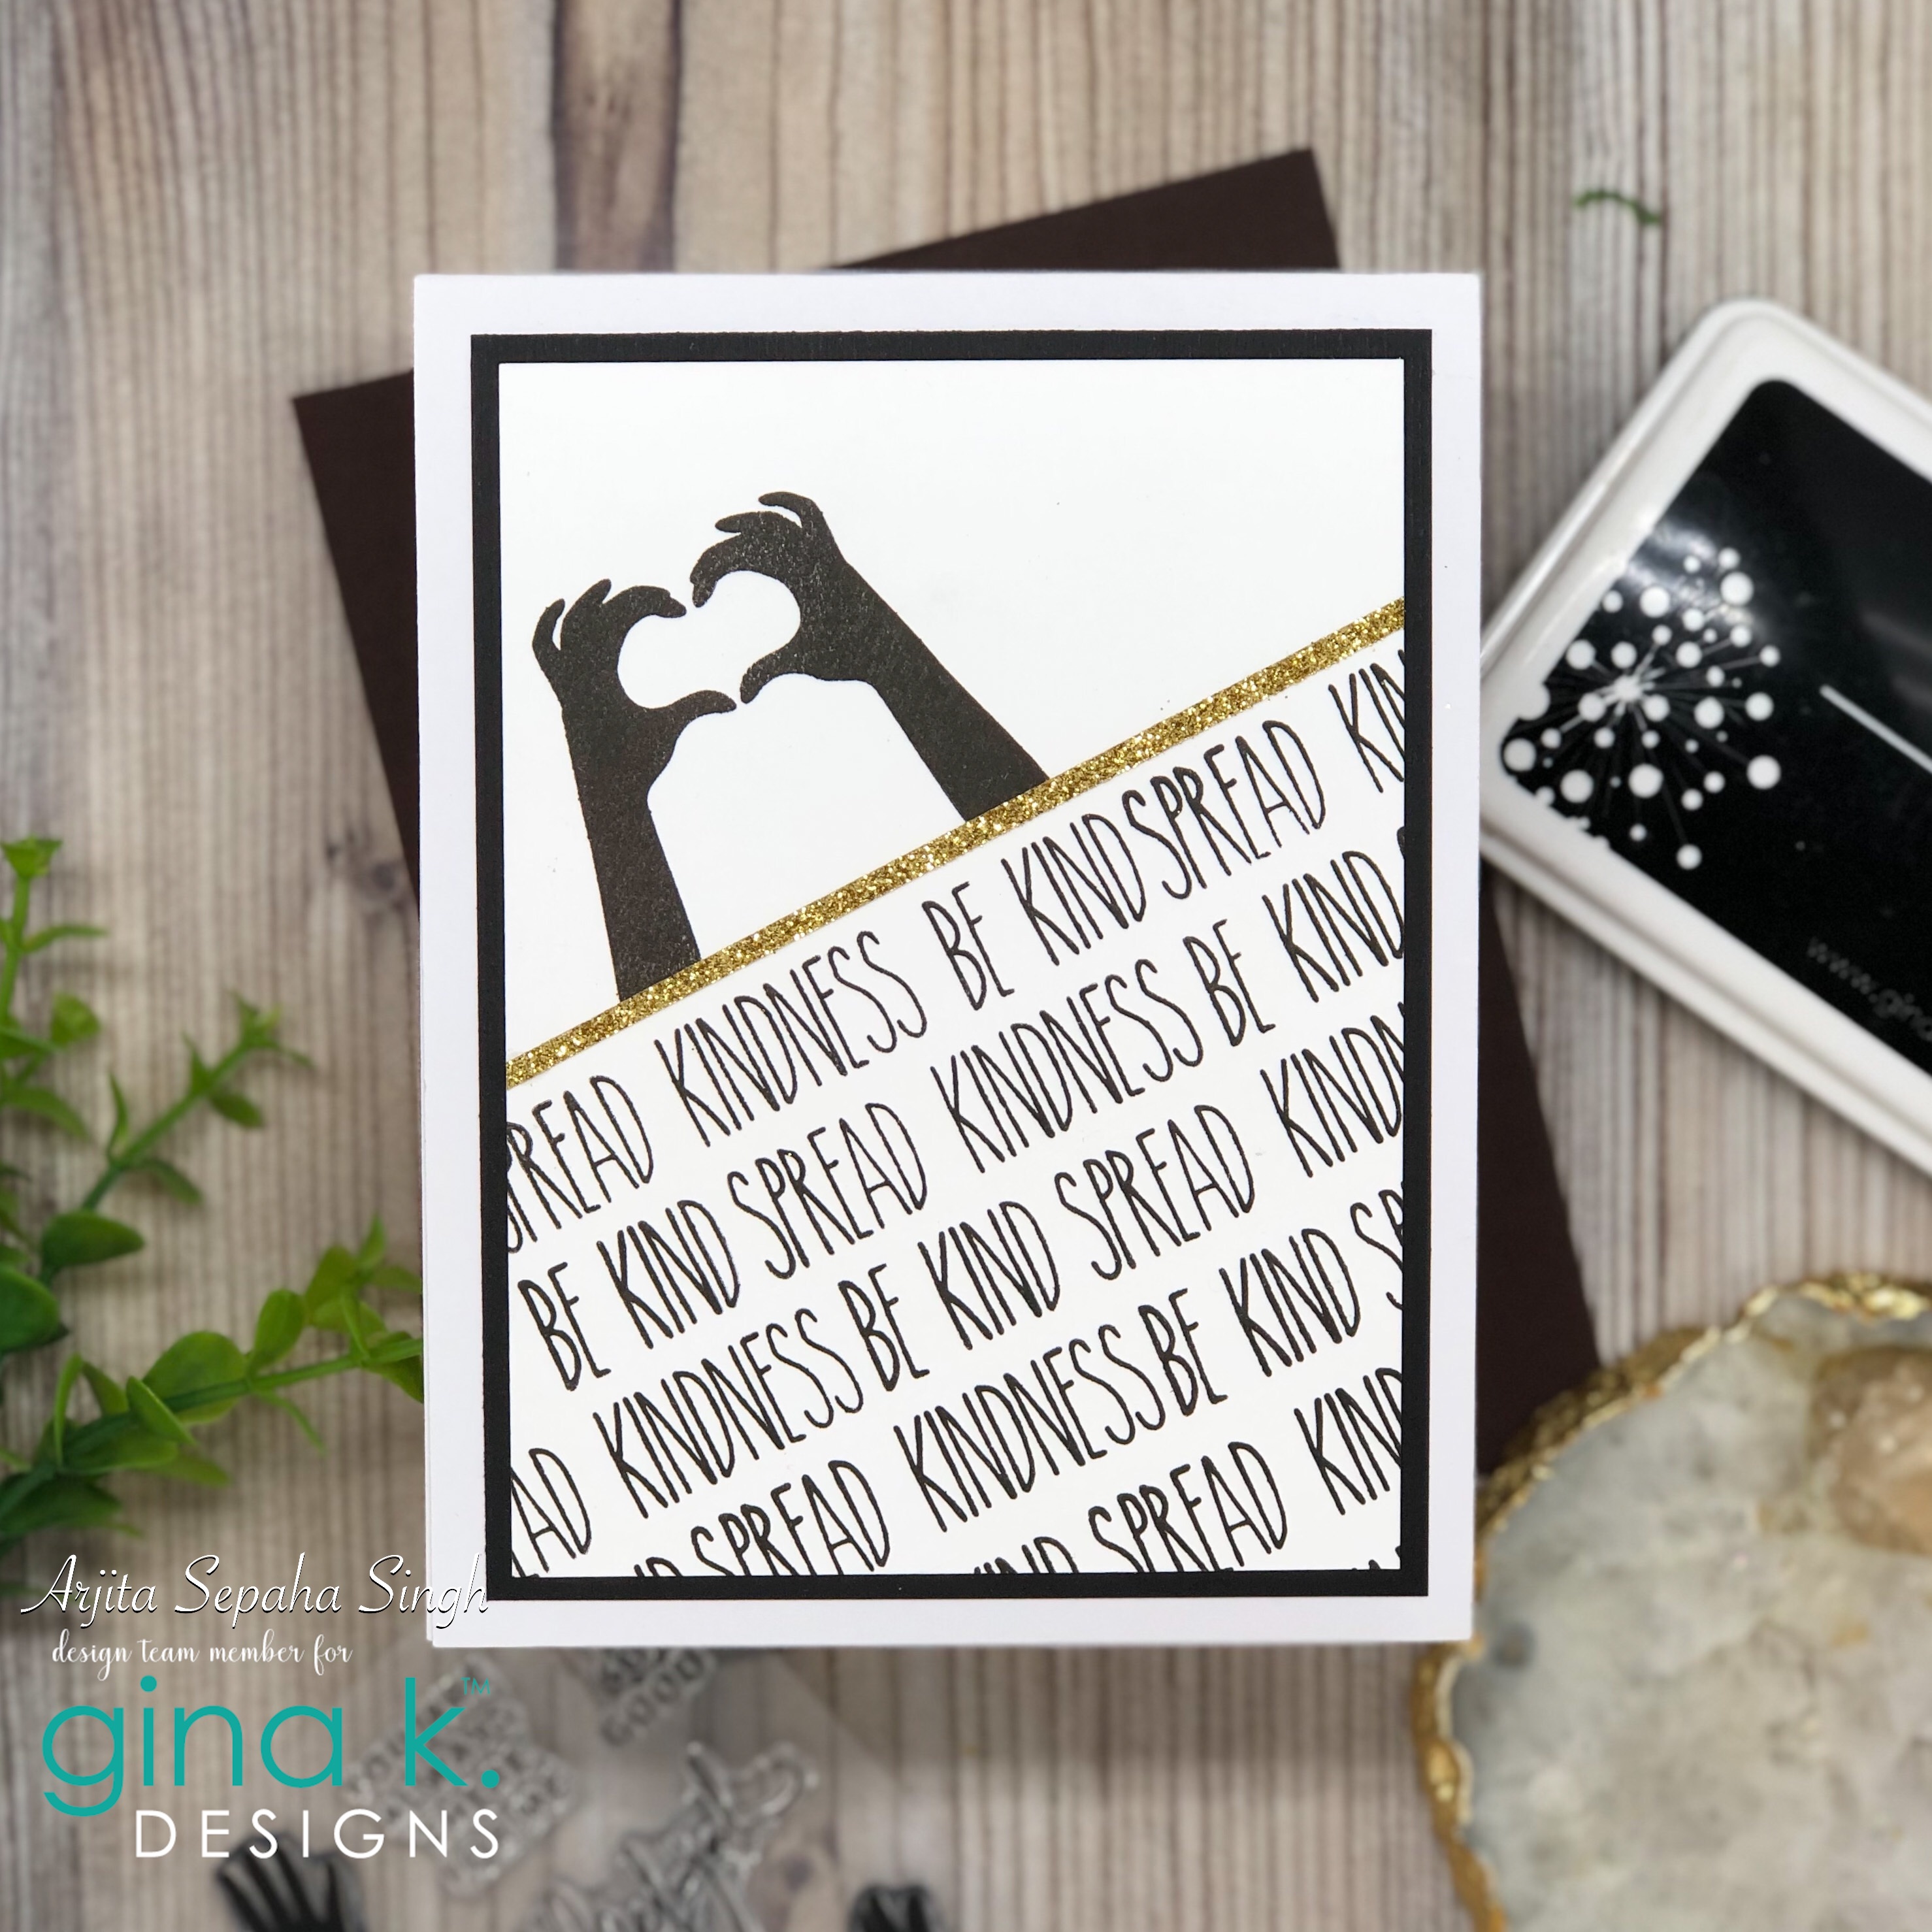 Gina K Designs - Today, I have a fun card for you